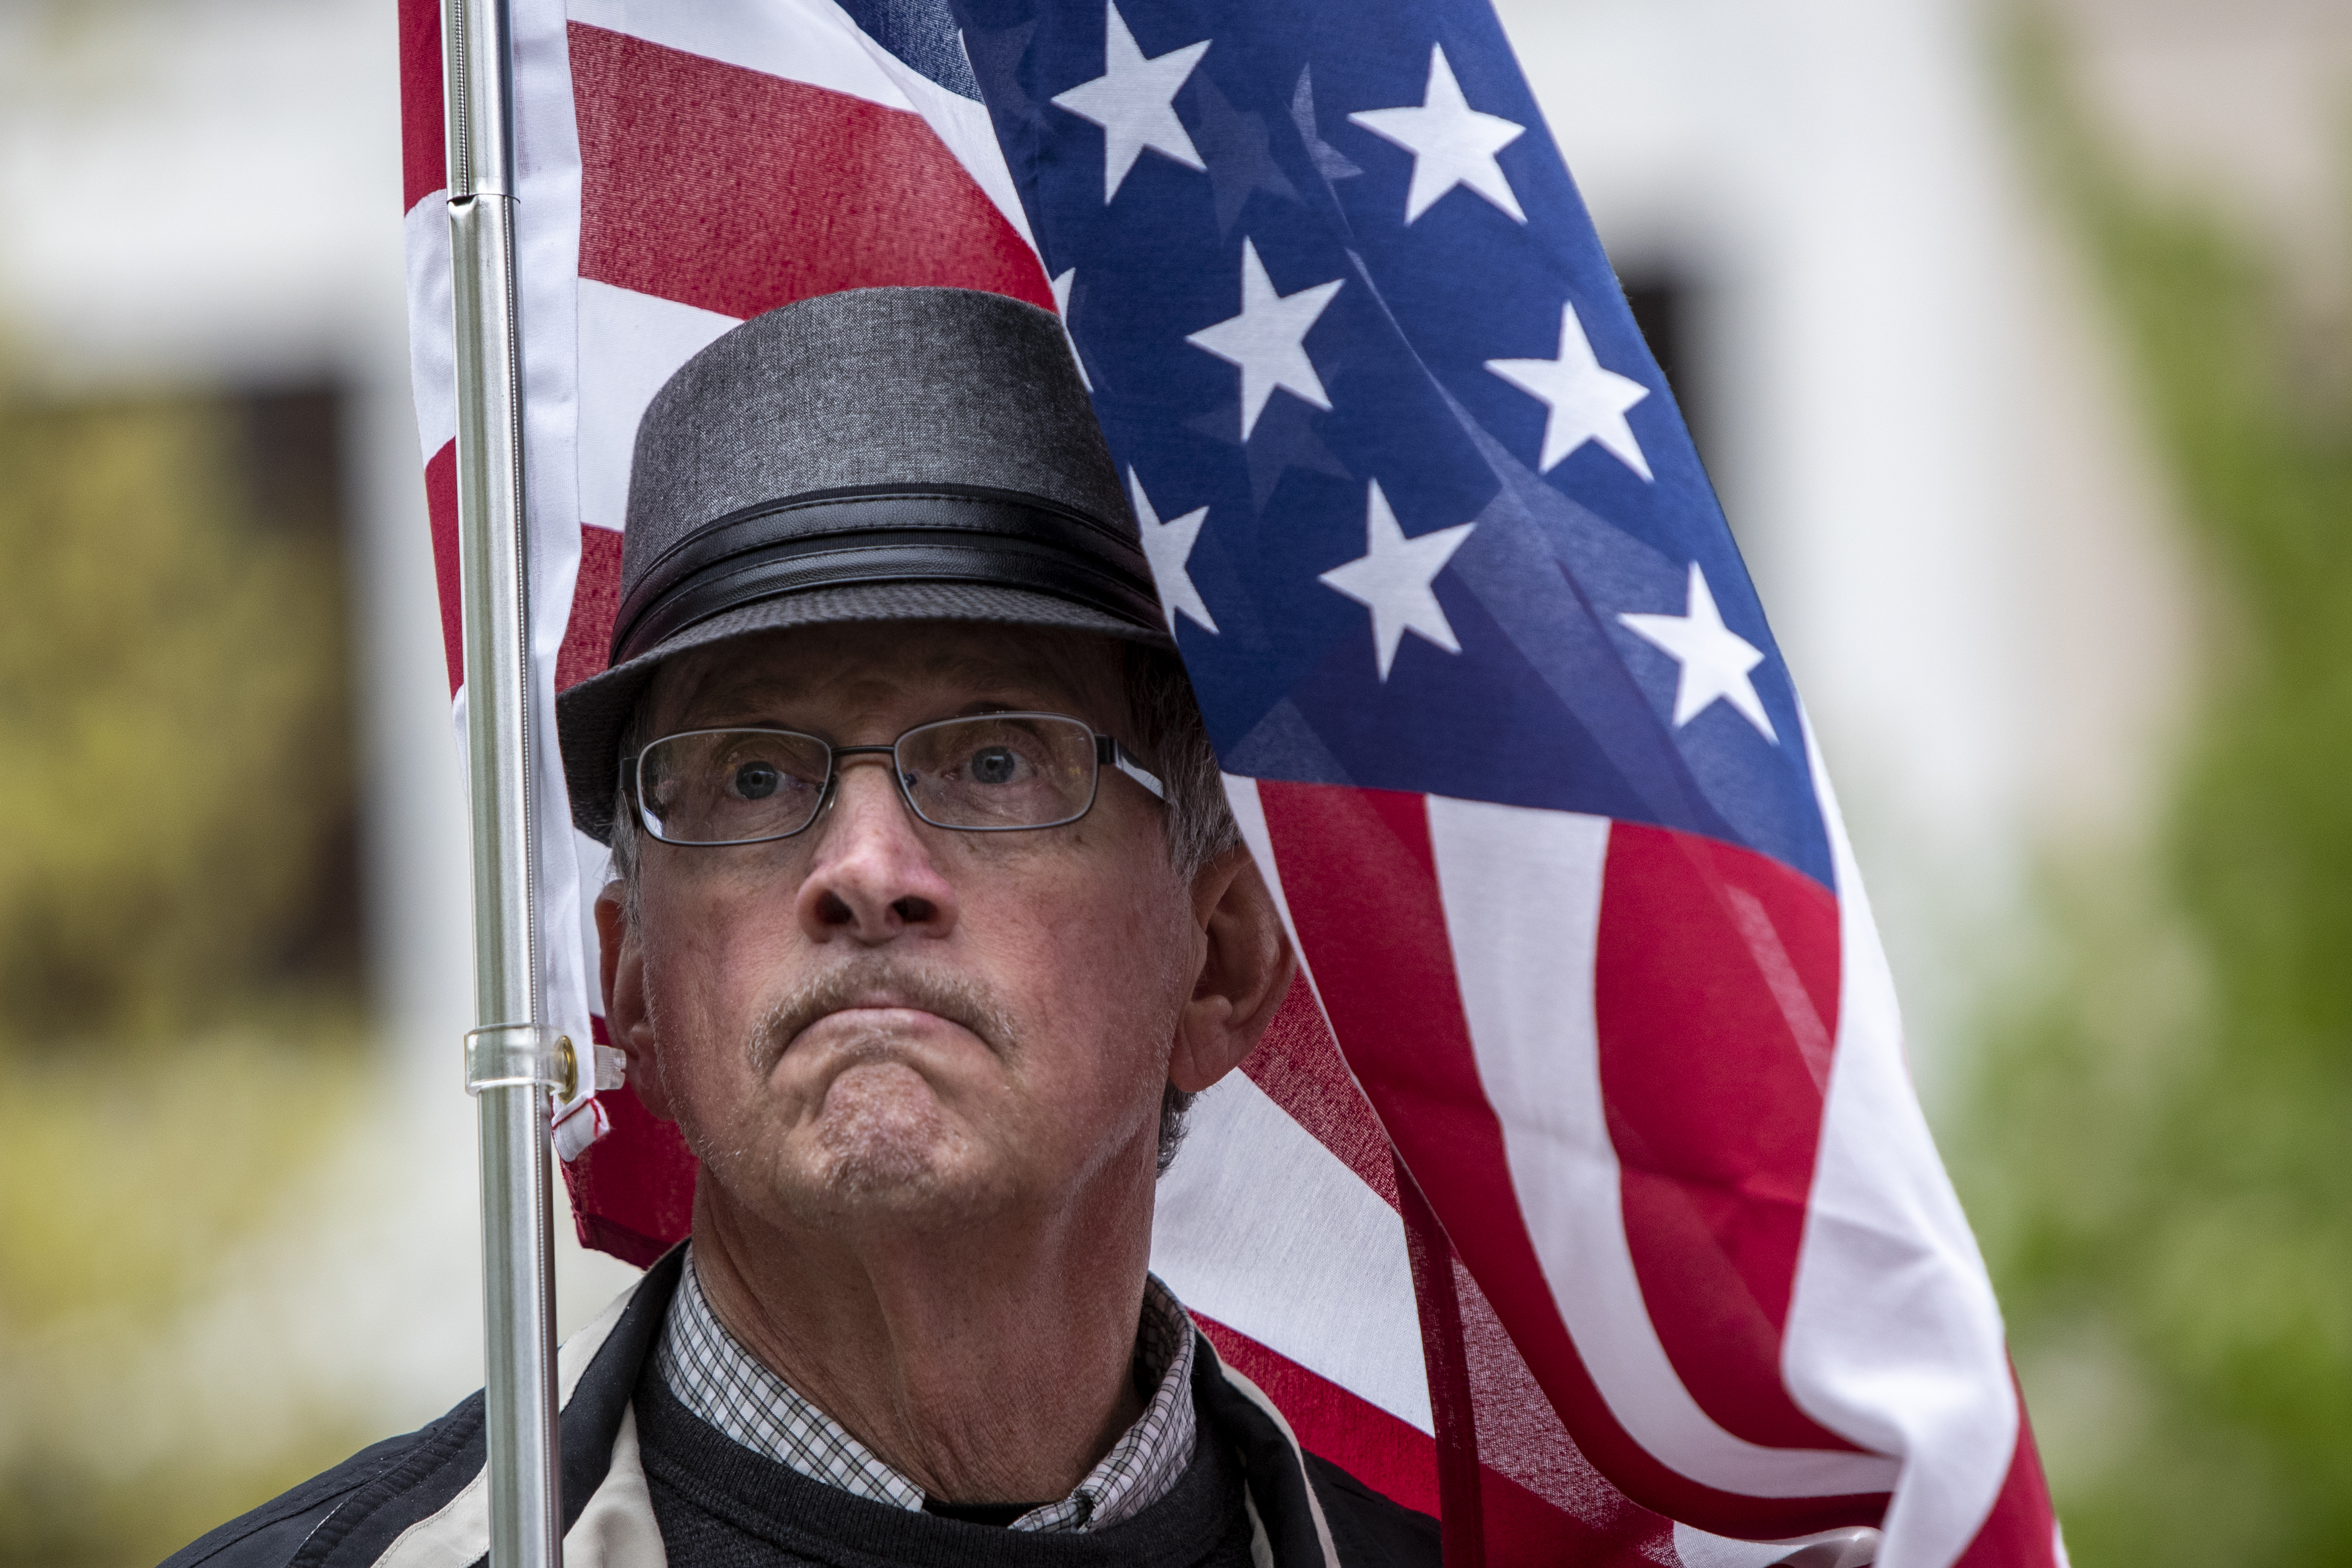 Bruce Beebe, of Newaygo, takes part in the "American Patriot Rally-Sheriffs speak out" event at Rosa Parks Circle in downtown Grand Rapids on Monday, May 18, 2020. The crowd is protesting against Gov. Gretchen Whitmer's stay-at-home order. "Some of the areas should have been opened up long before," he said. (Cory Morse | MLive.com)